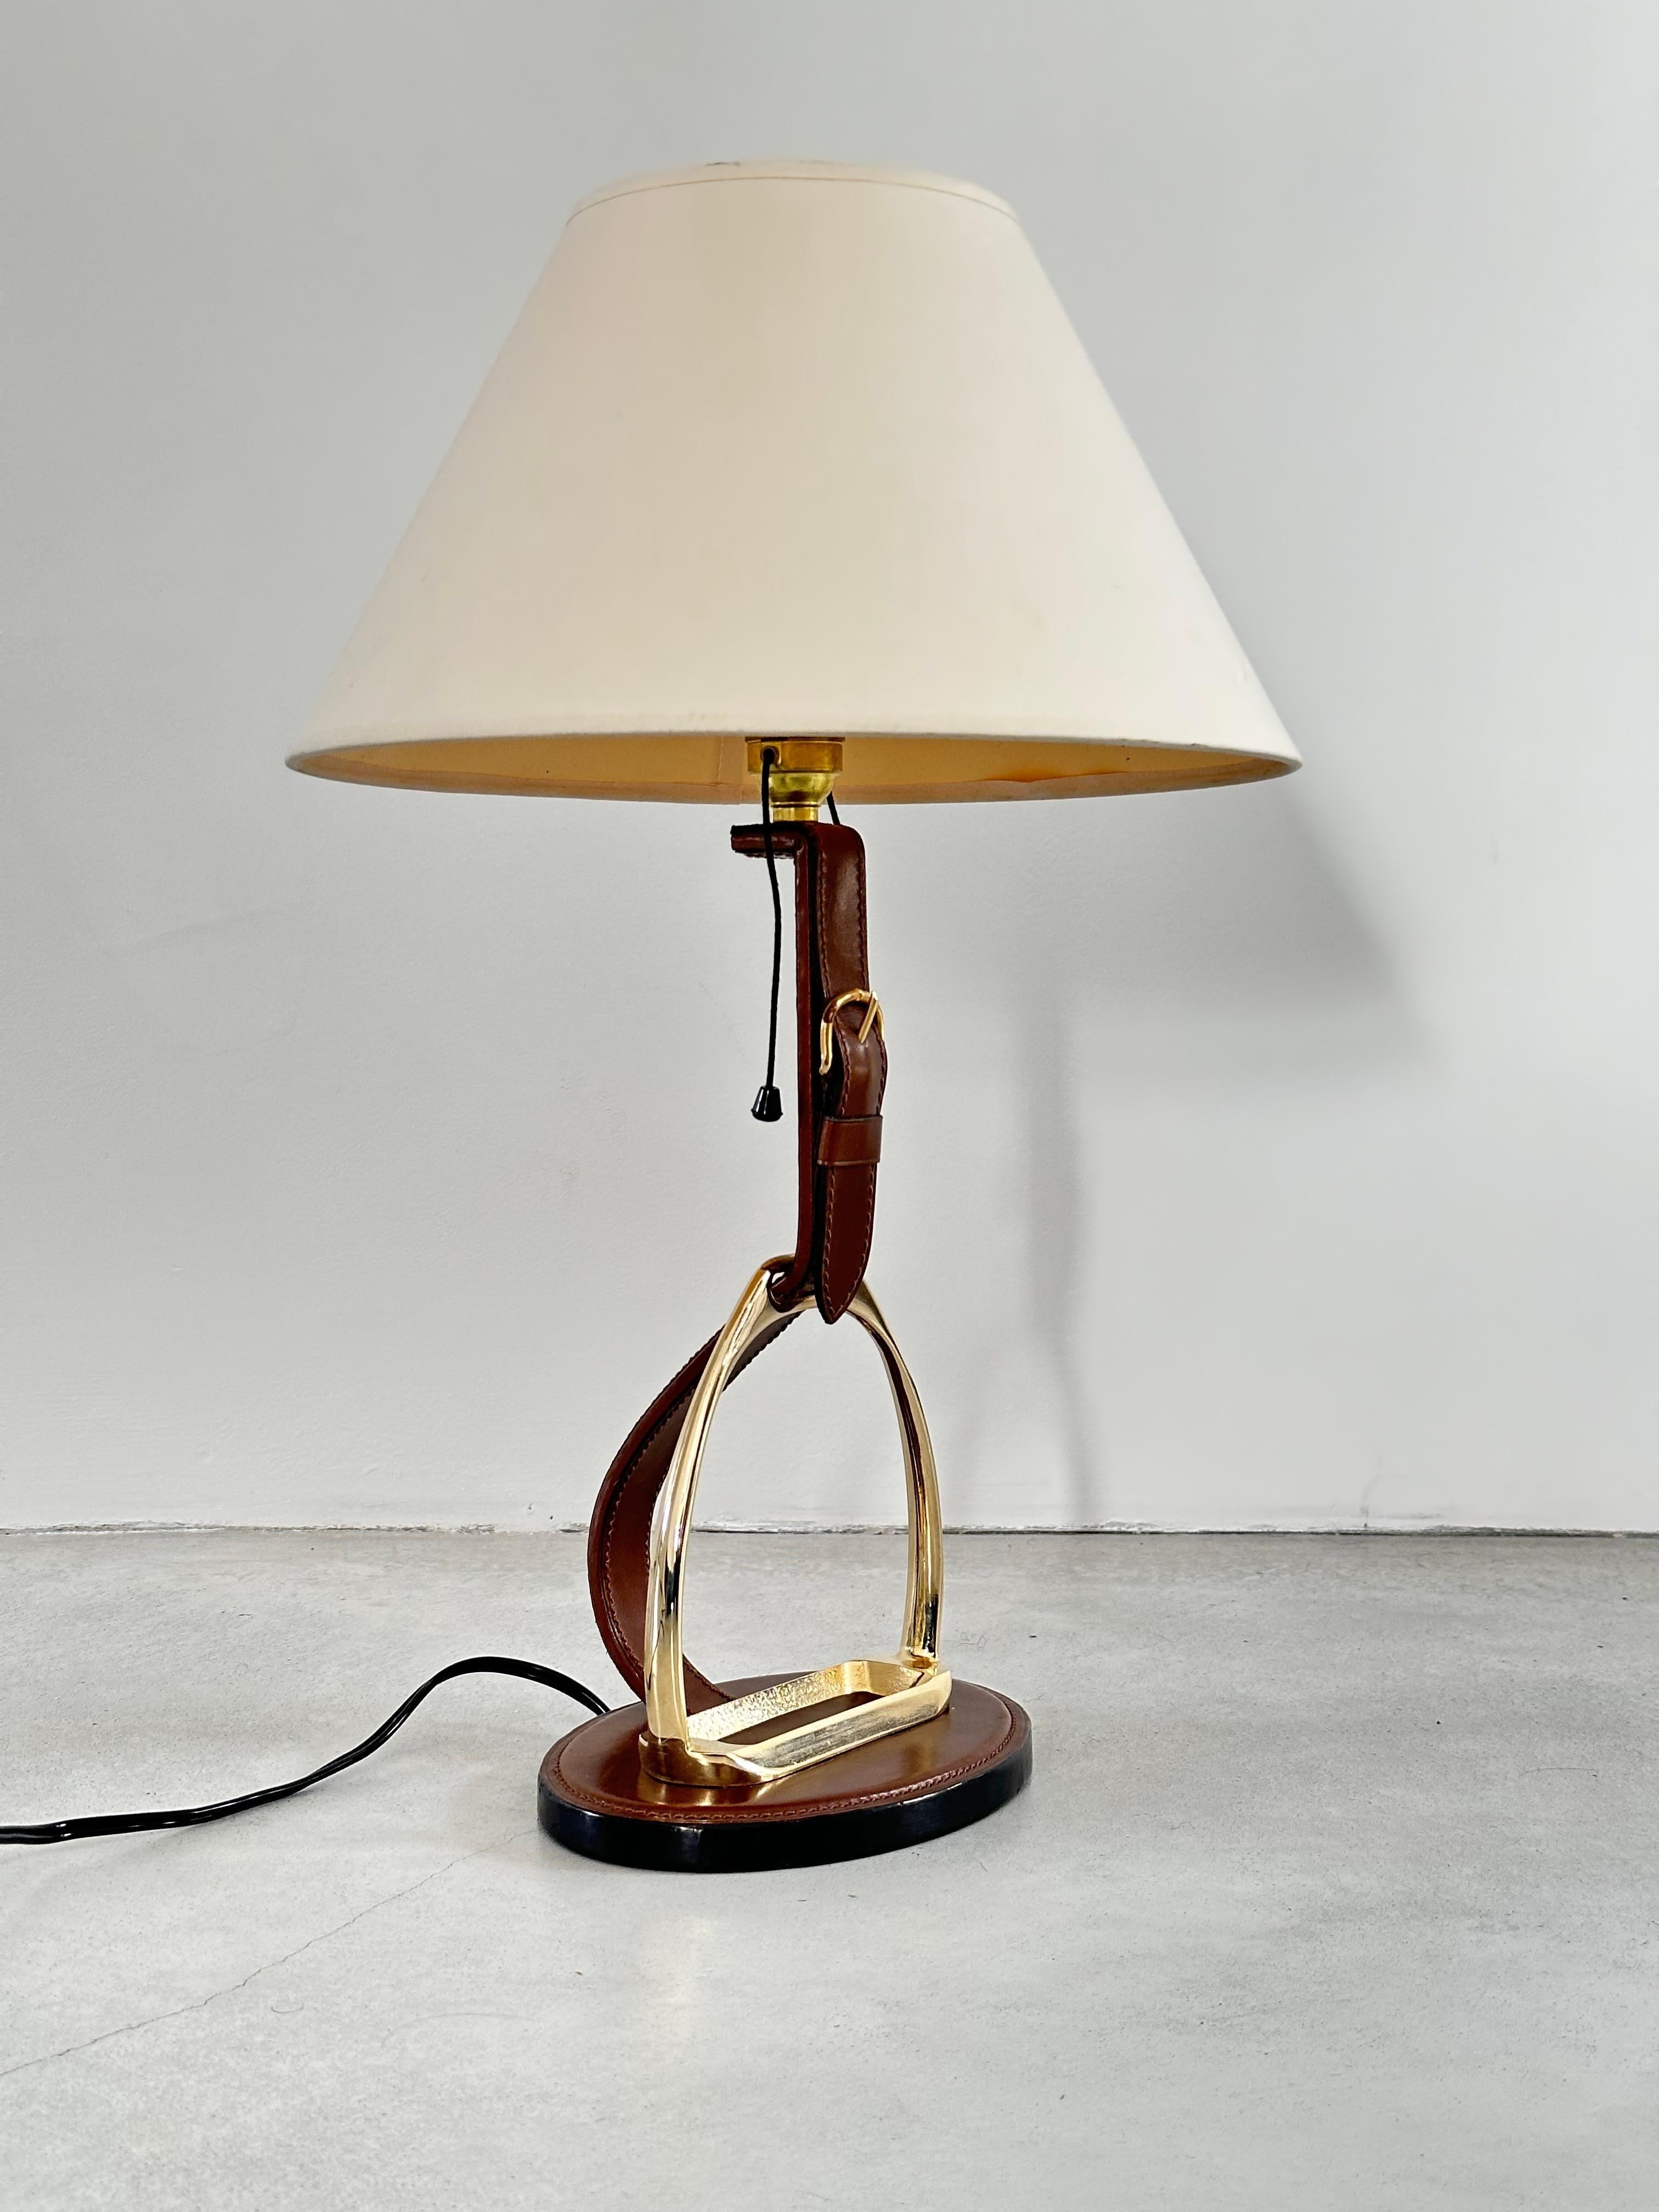 Longchamp design, French Brass & Equestrian Stitched Leather Lamp, 1960s For Sale 4